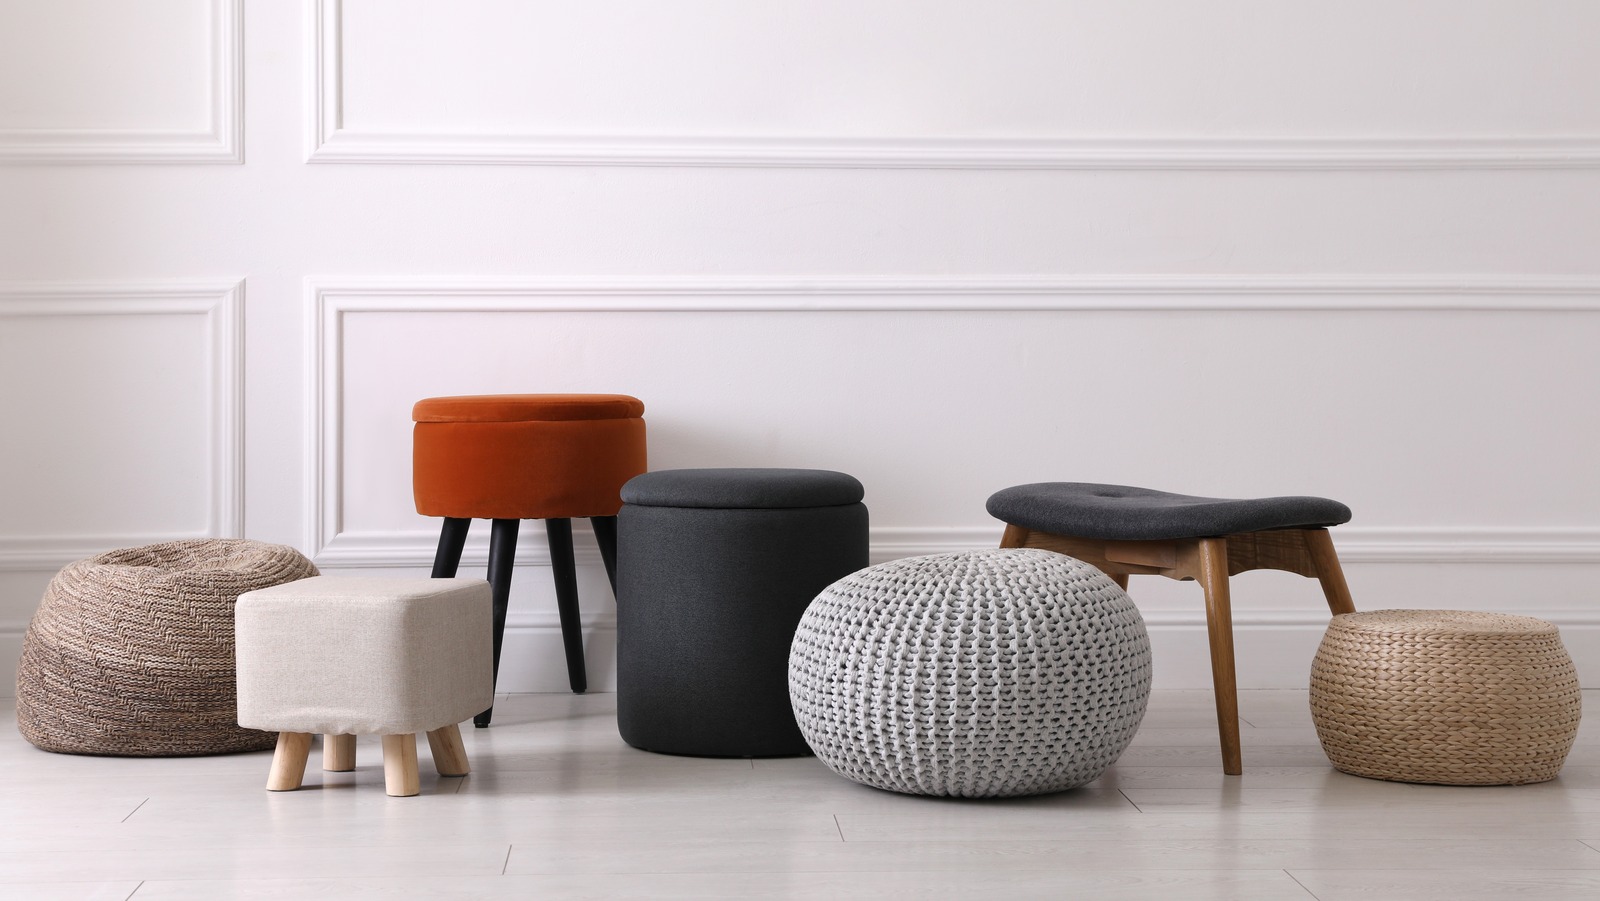 Ottoman Vs. Footstool: Which Is Right For Your Space? – House Digest